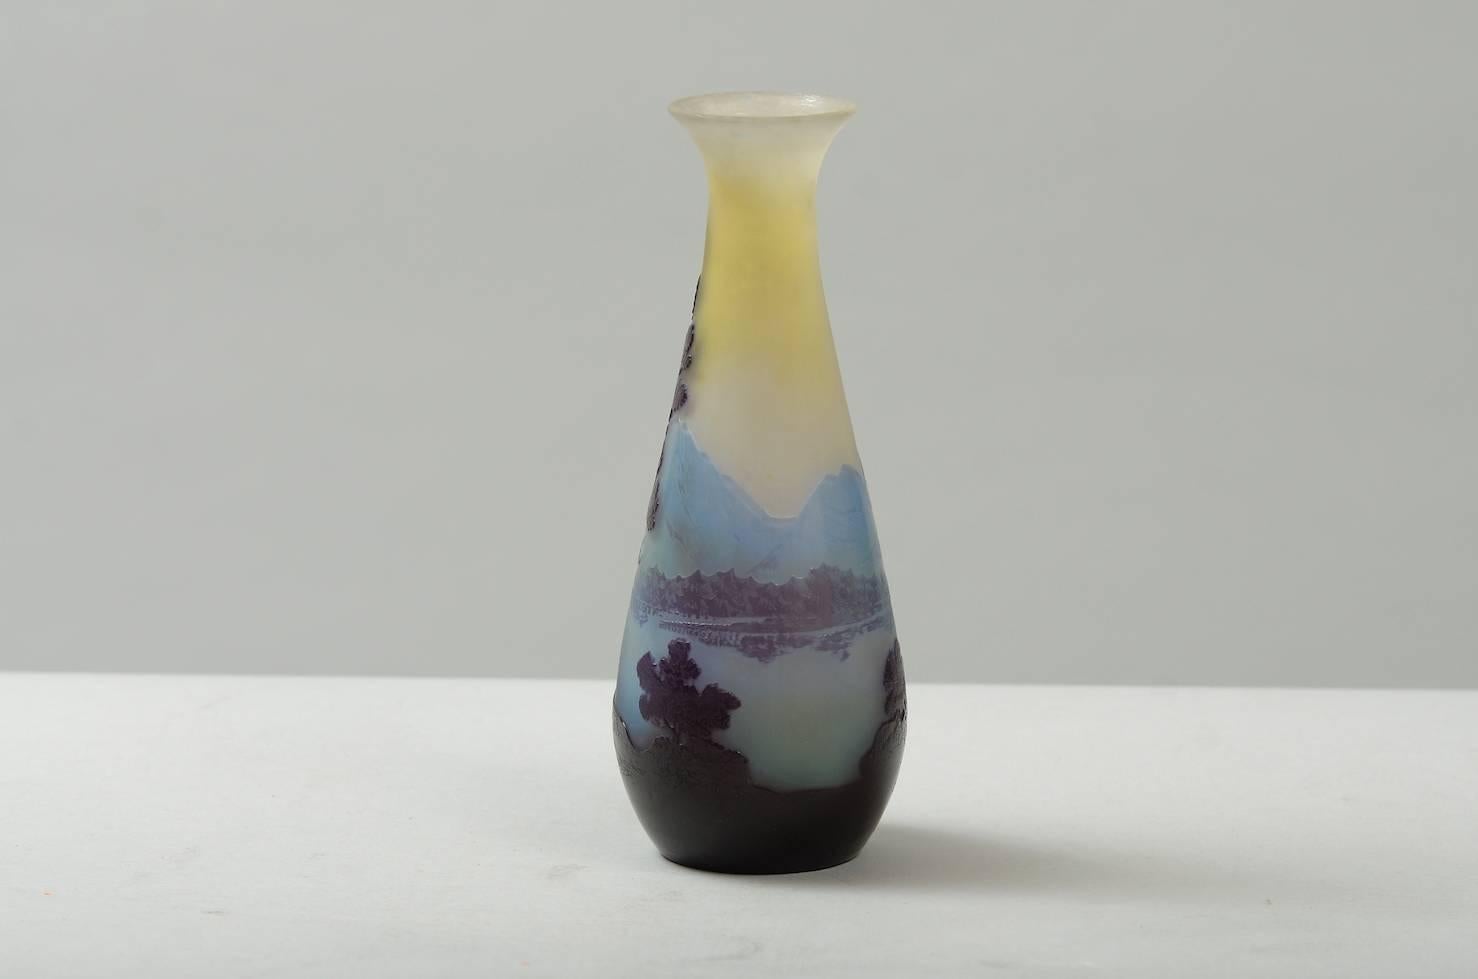 Glass vase, this vase features a landscape scene from the Les Vosges region in France.